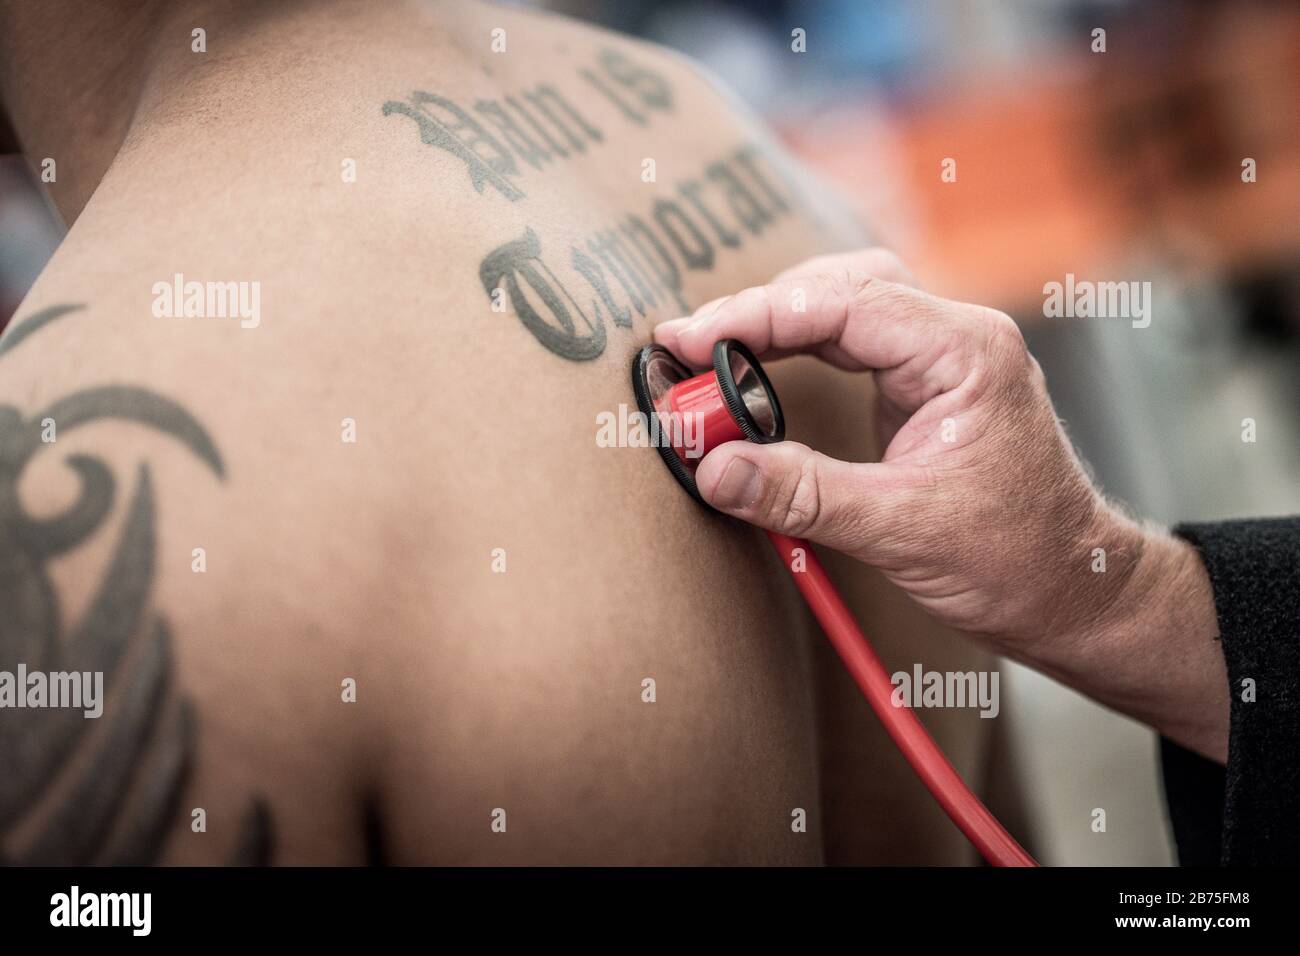 Boxing match at the Simbacher Pfingstdult. Before the fight the ring doctor examines a fighter from Berlin-Nordwedding, on whose back 'Pain is Temporary' is tattooed [automated translation] Stock Photo